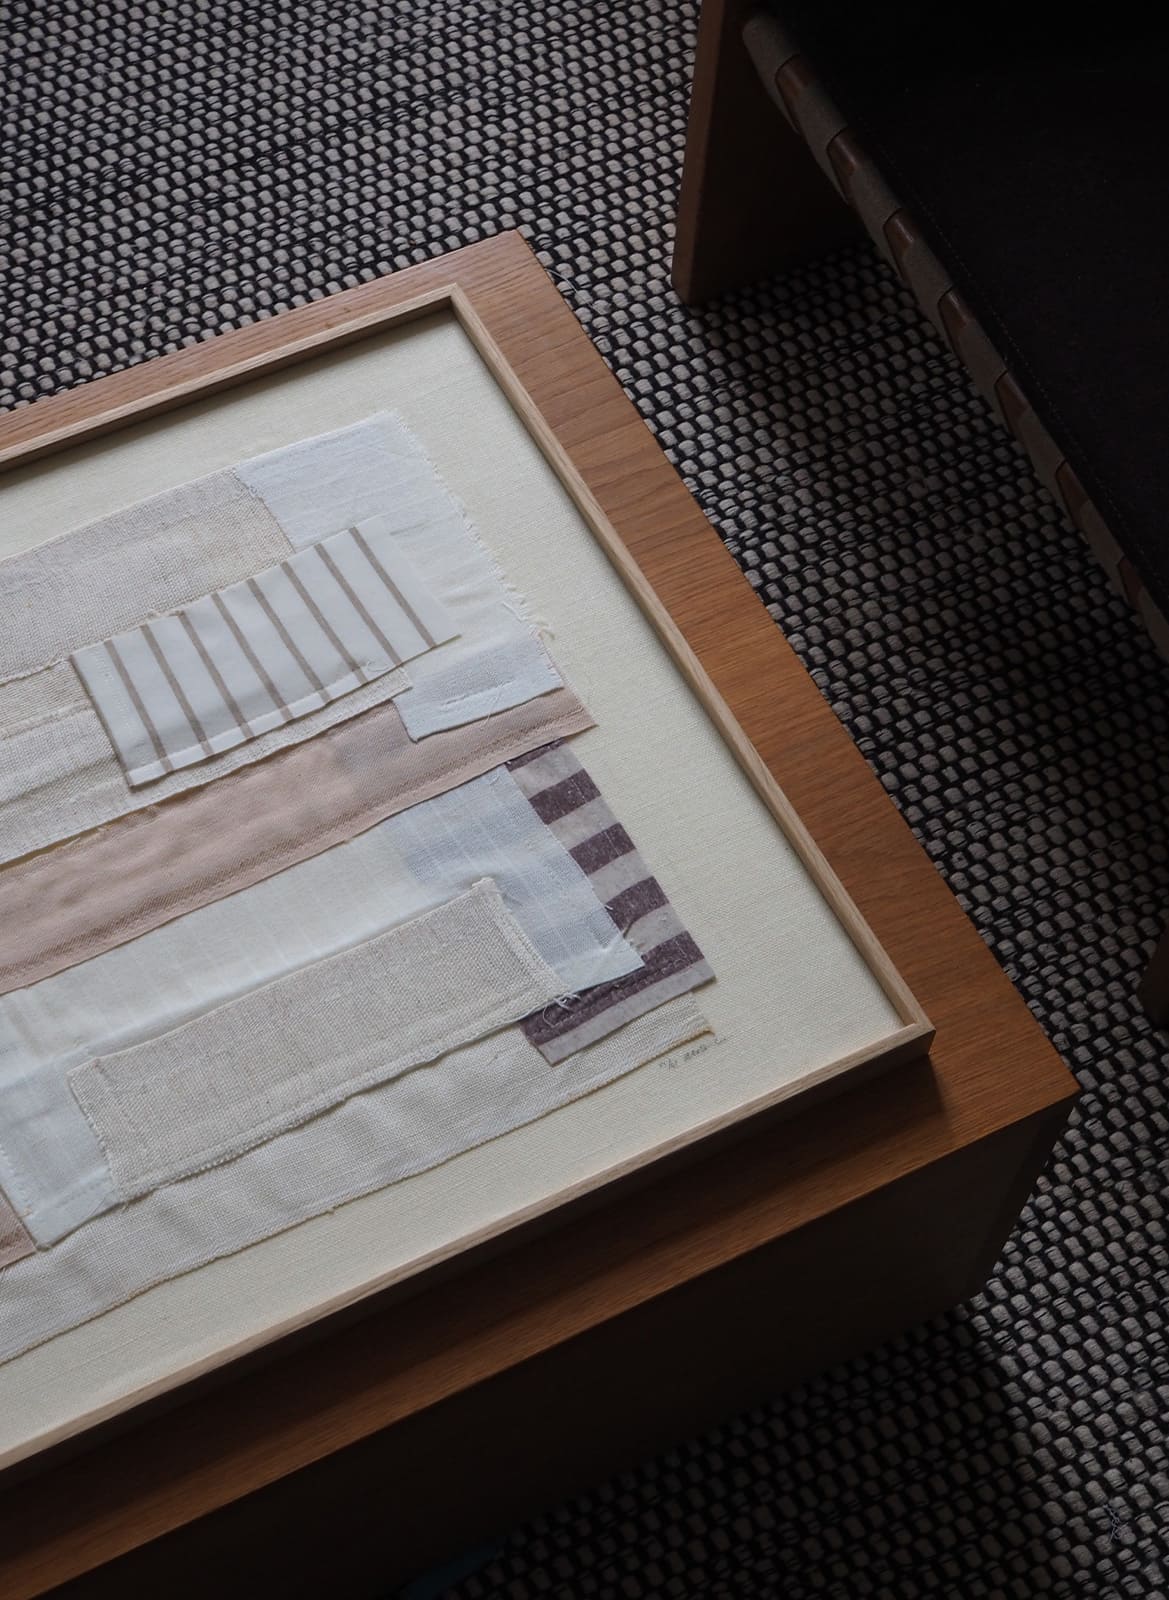 Framed limited edition art work made from stripped fabric pieces by Atelier Cph